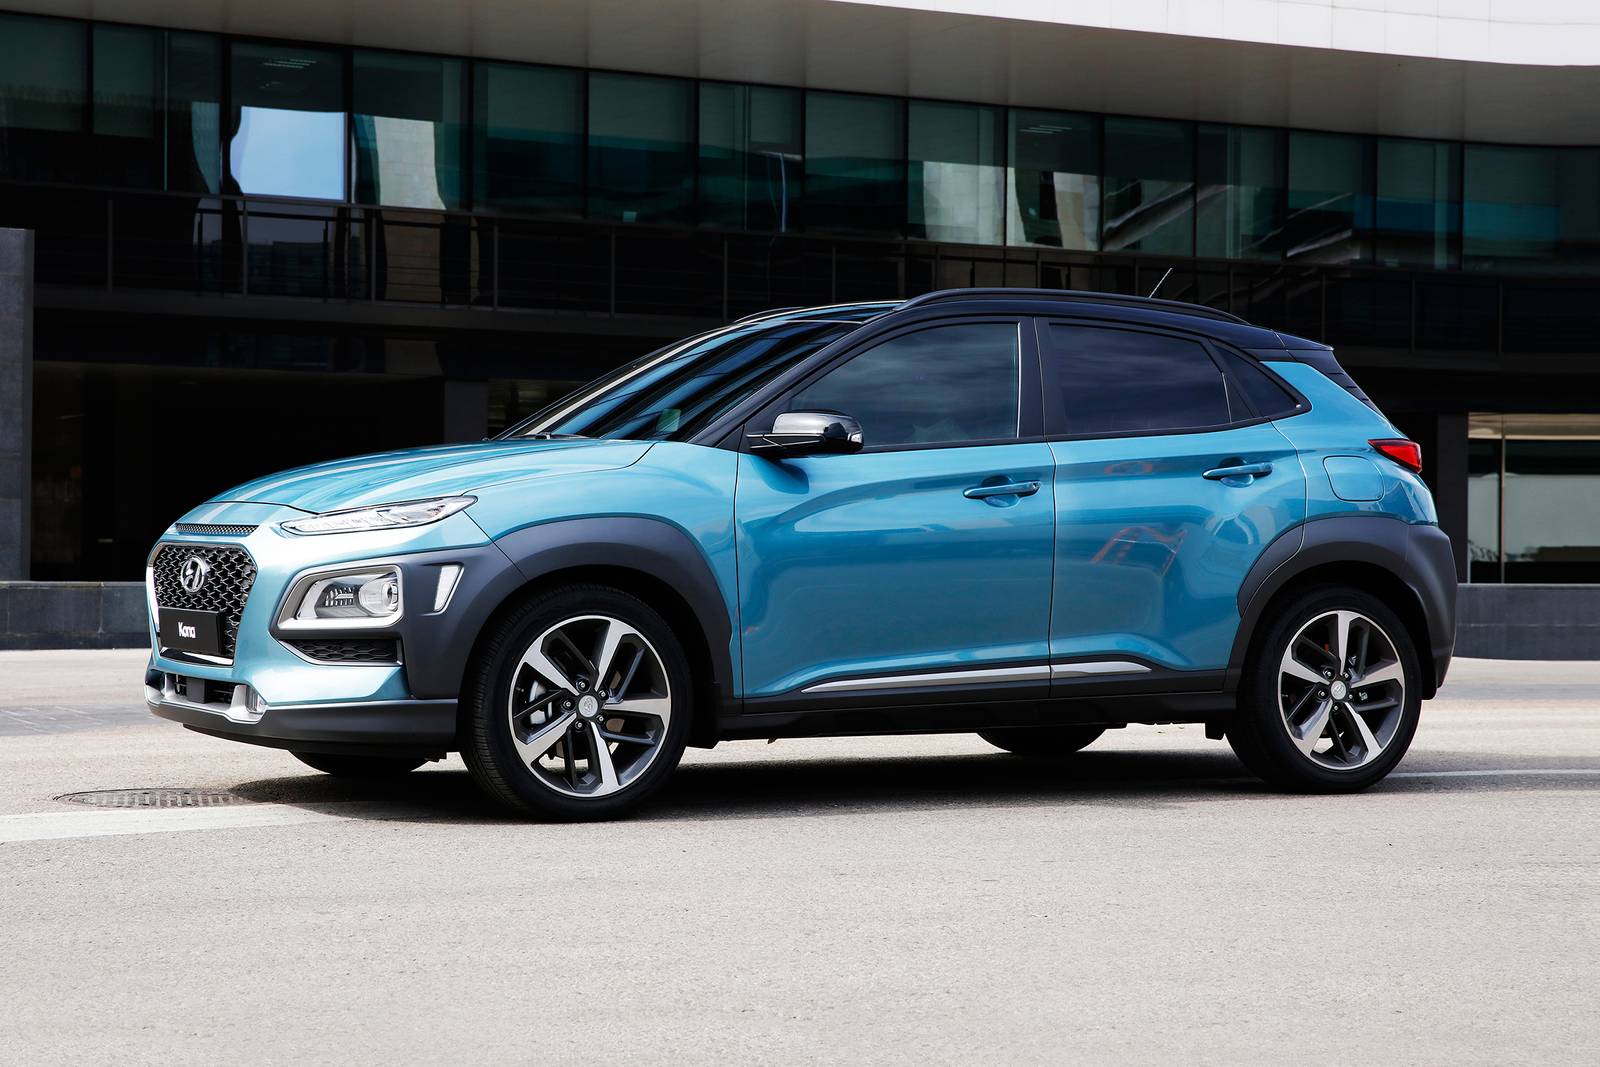 8 Hyundai Kona Prices, Reviews, and Pictures   Edmunds